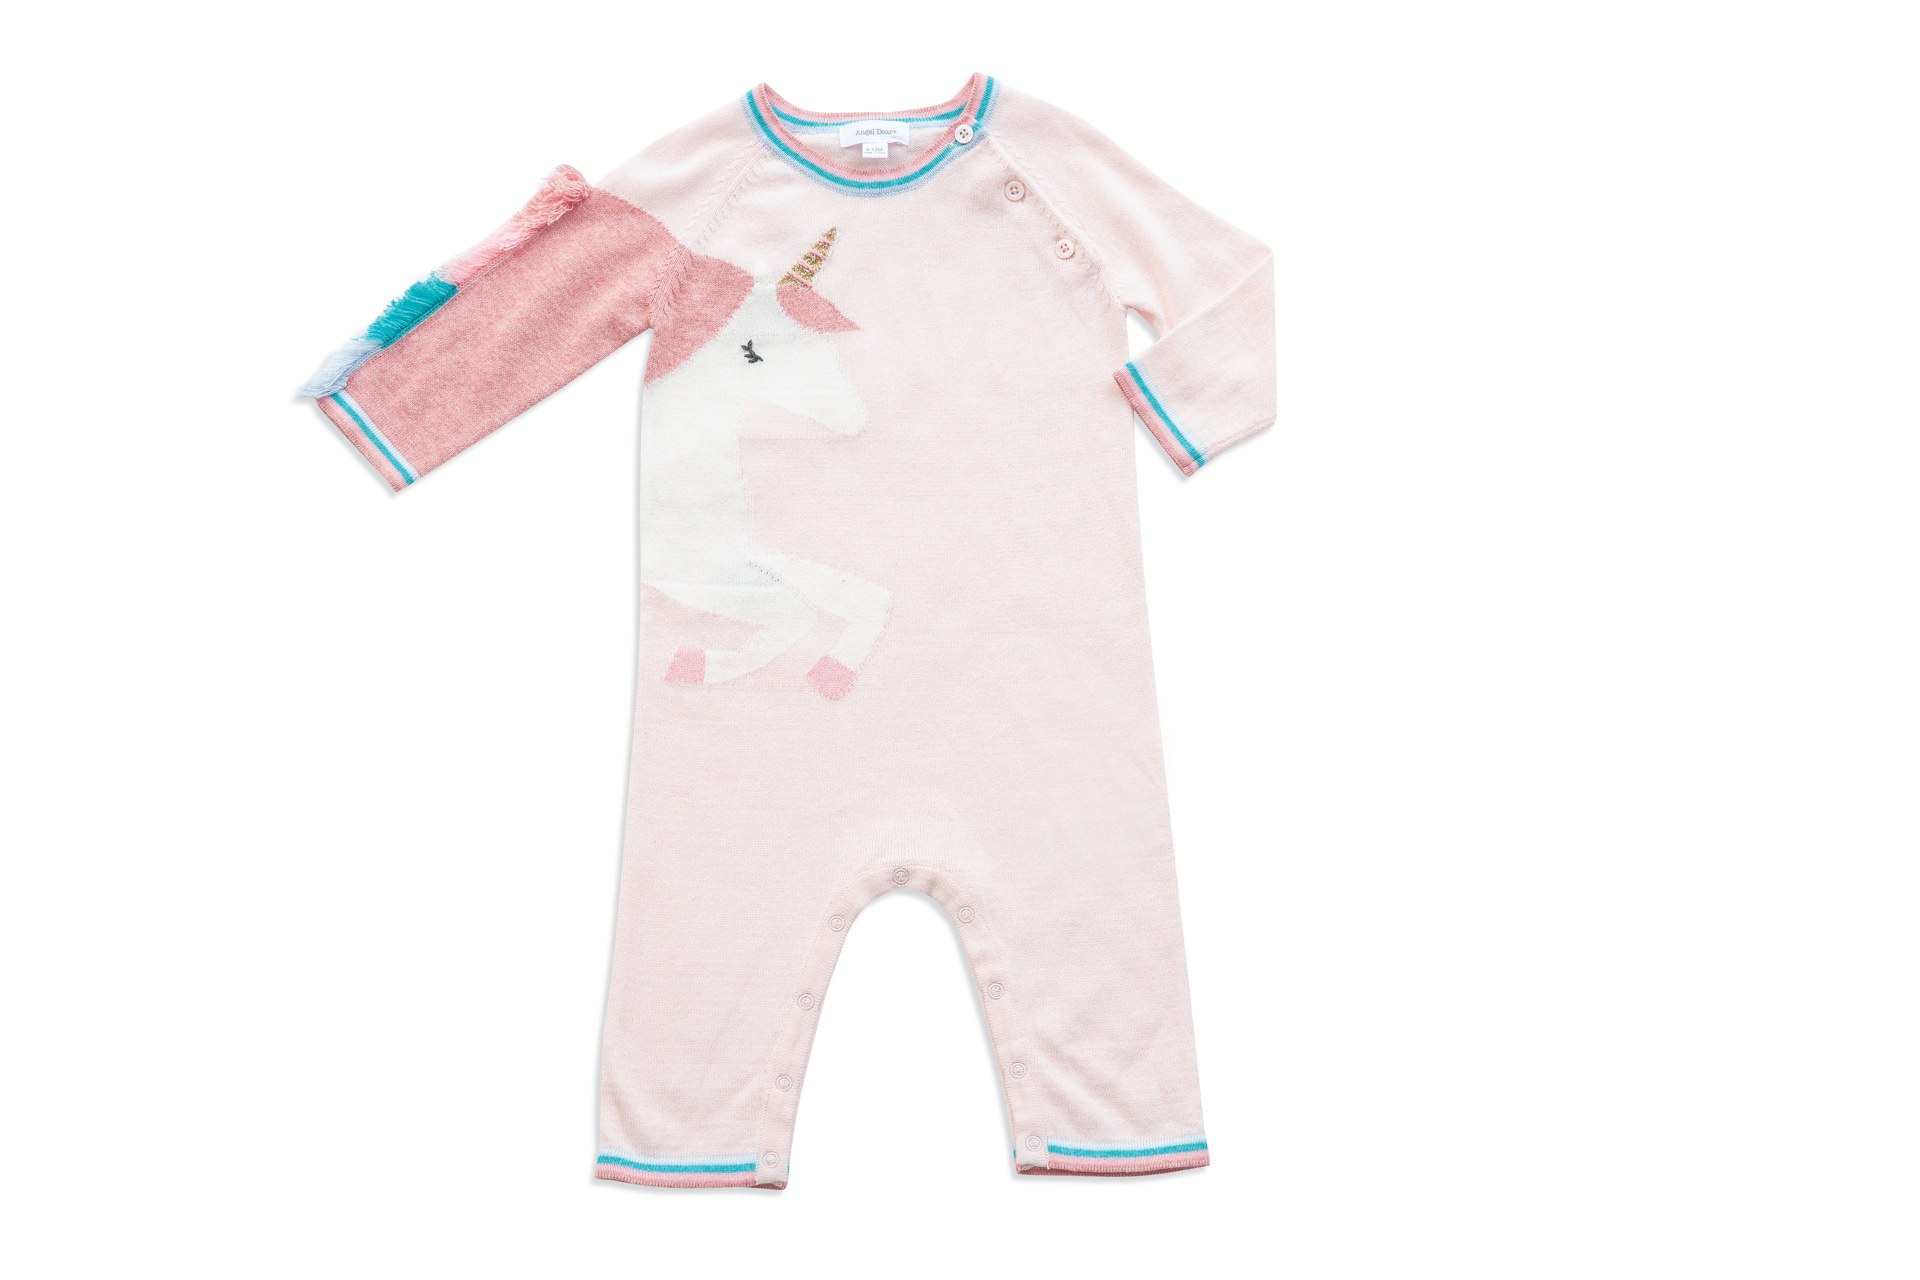 Angel Dear Cosmic Wonder Knits Unicorn Coverall in 3-6 Months